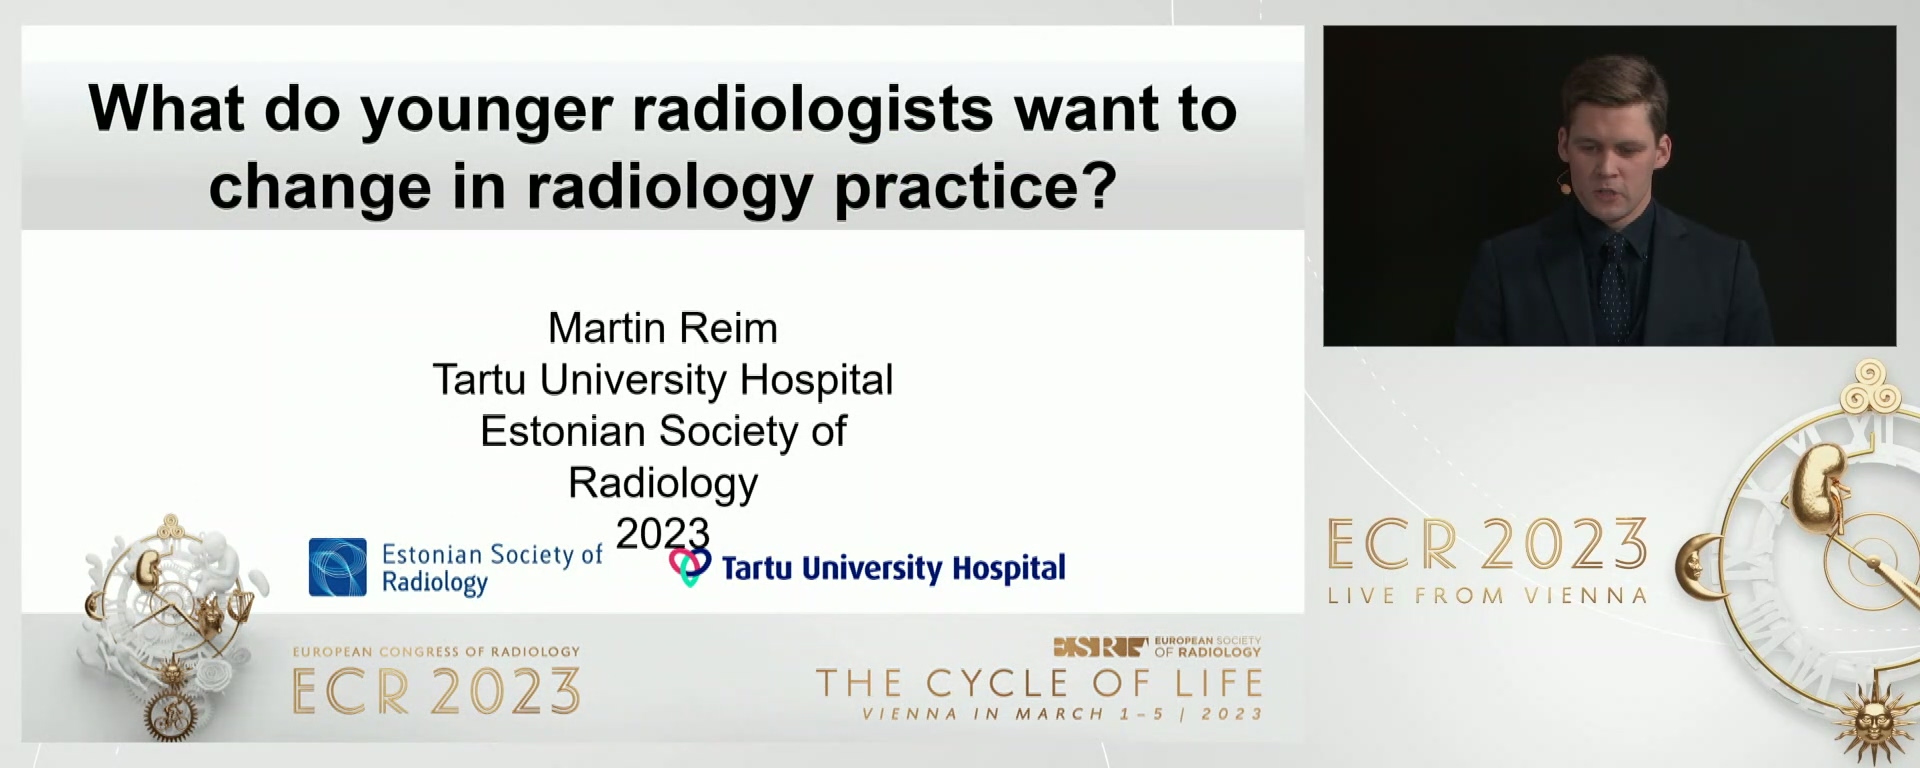 What do younger radiologists want to change in radiology practice?